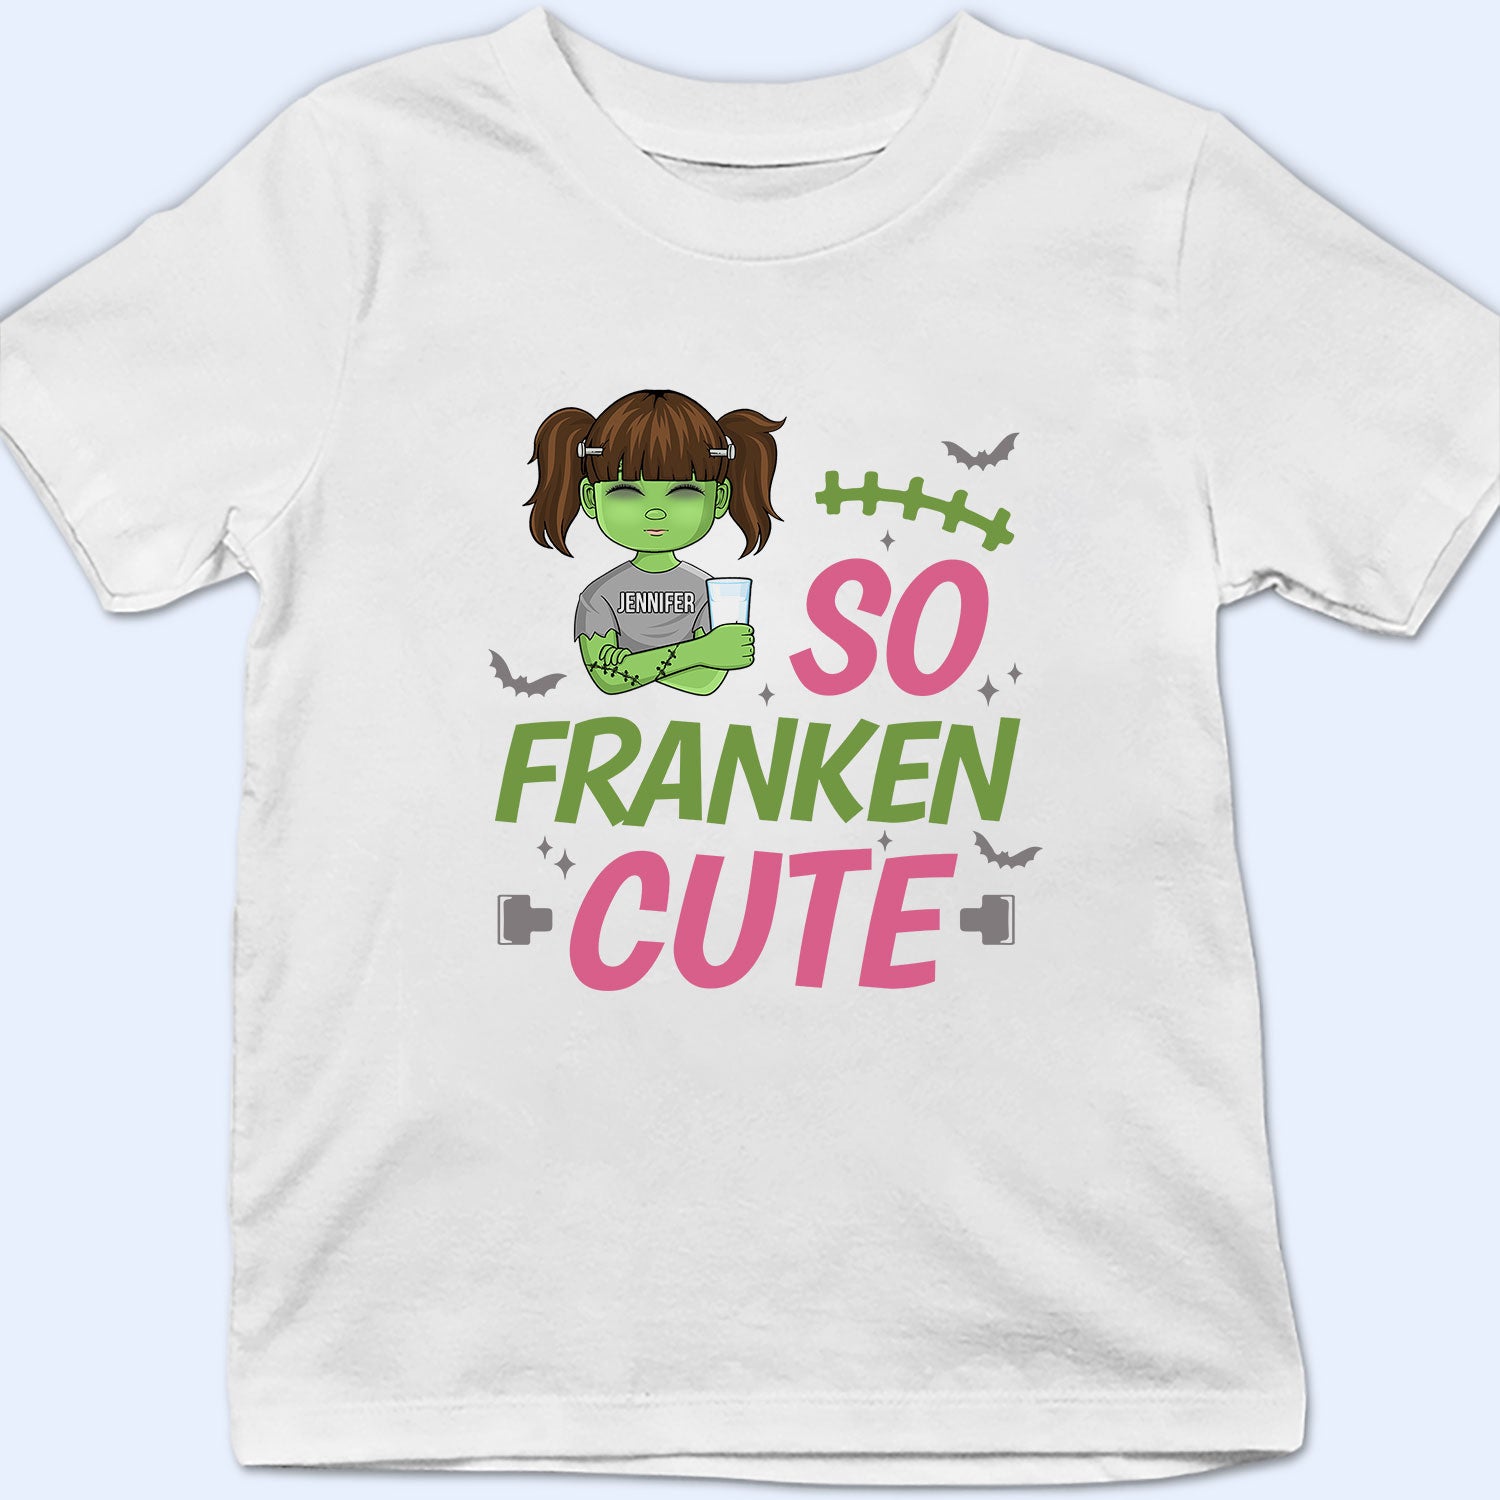 So Franken Cute - Gift For Kids - Personalized T Shirt